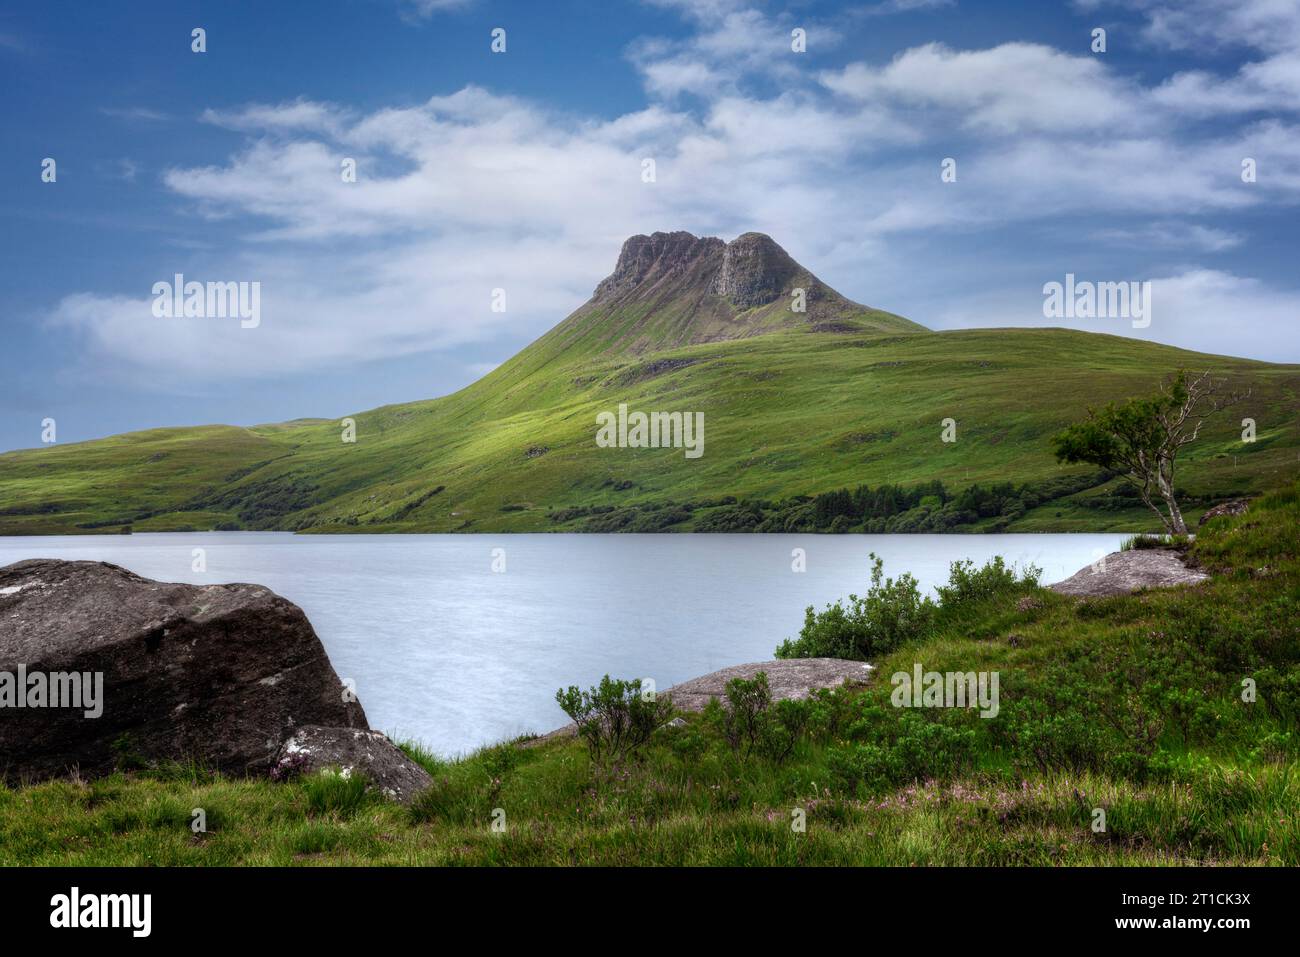 Stac Pollaidh is a distinctive mountain located in the Assynt region of Sutherland, Scotland. Stock Photo